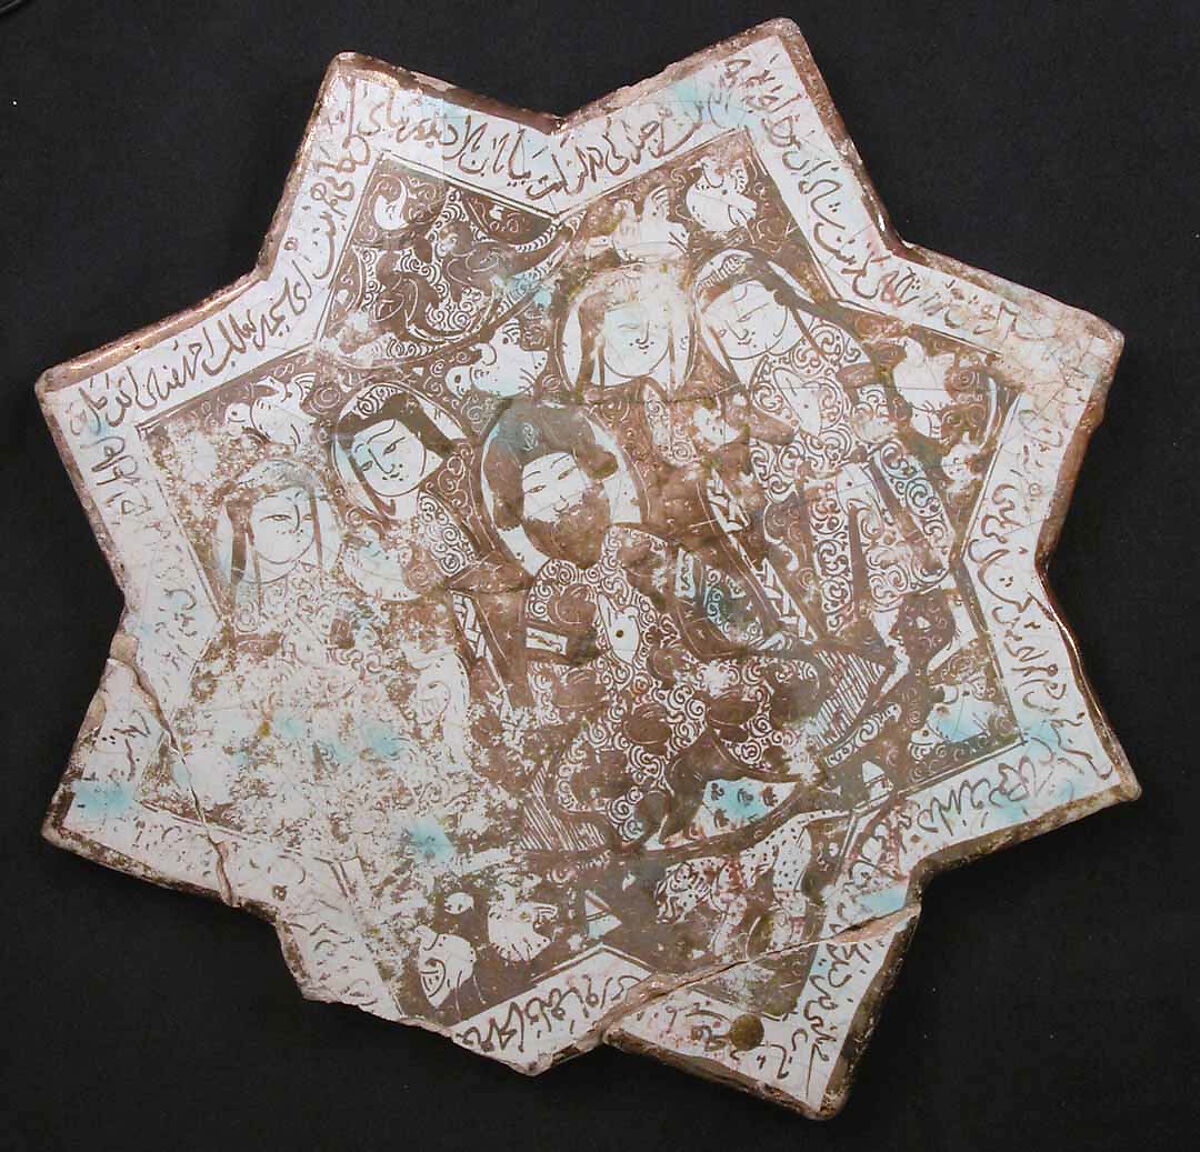 Luster Star-Shaped Tile, Stonepaste; luster-painted on opaque glaze with inglaze painting